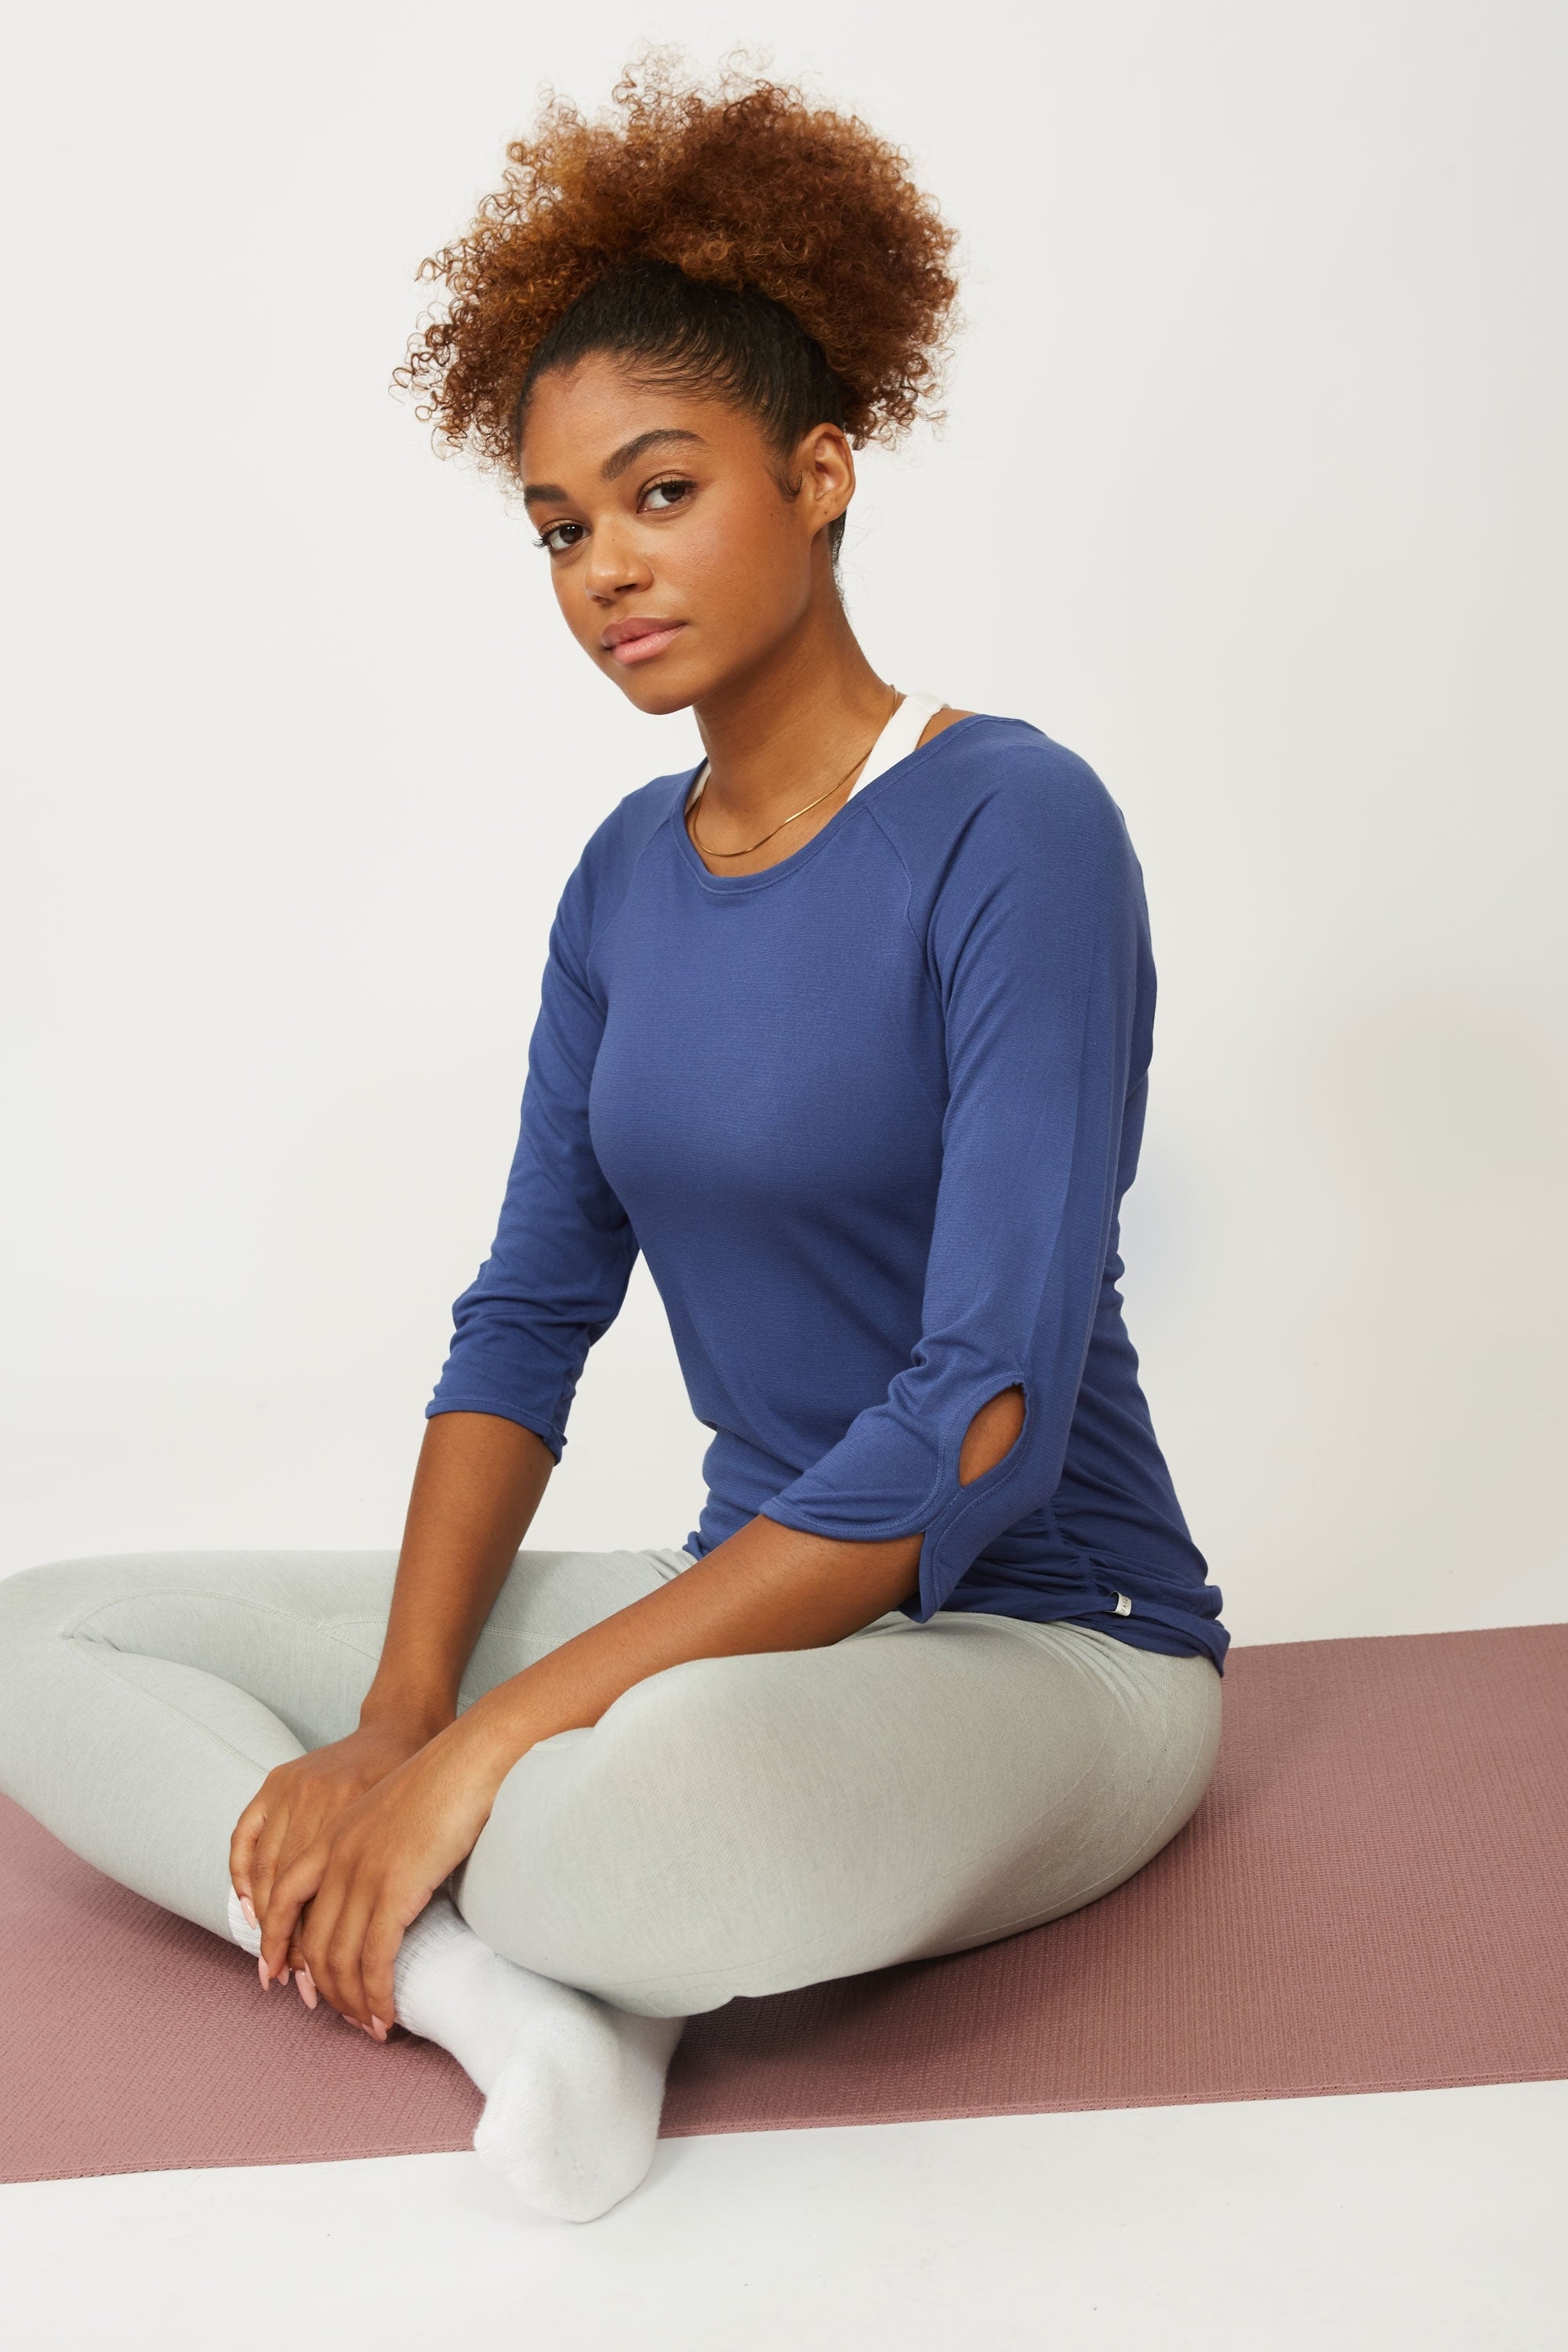 Model wearing blue long sleeve top and grey leggings for sustainable activewear brand, Jilla.